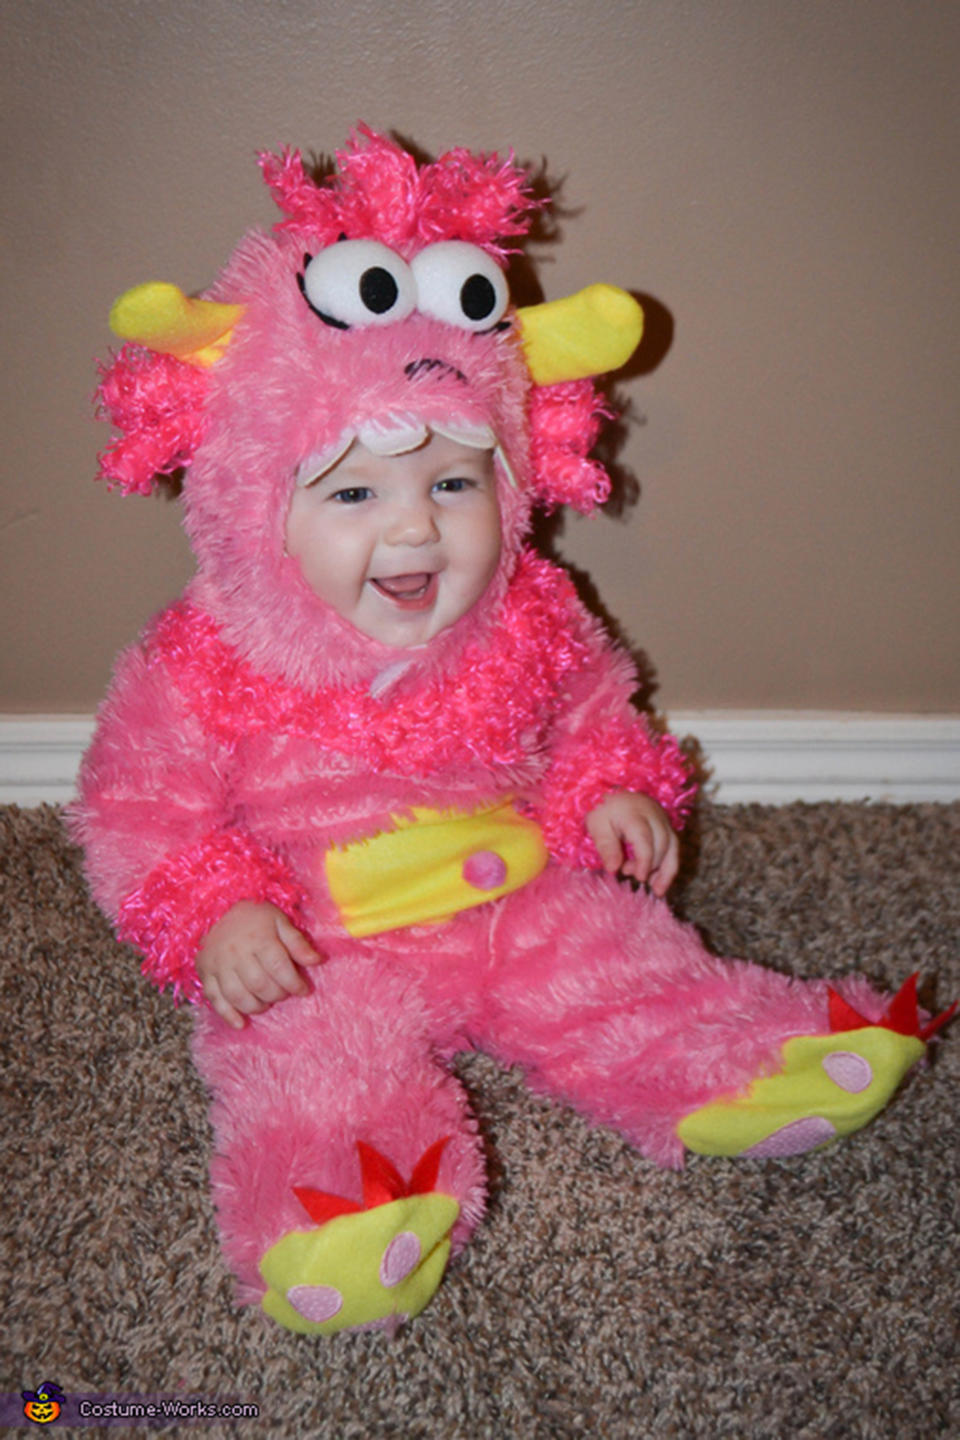 <a href="http://www.costume-works.com/costumes_for_babies/pink_little_monster.html" target="_blank">via Costume Works </a>